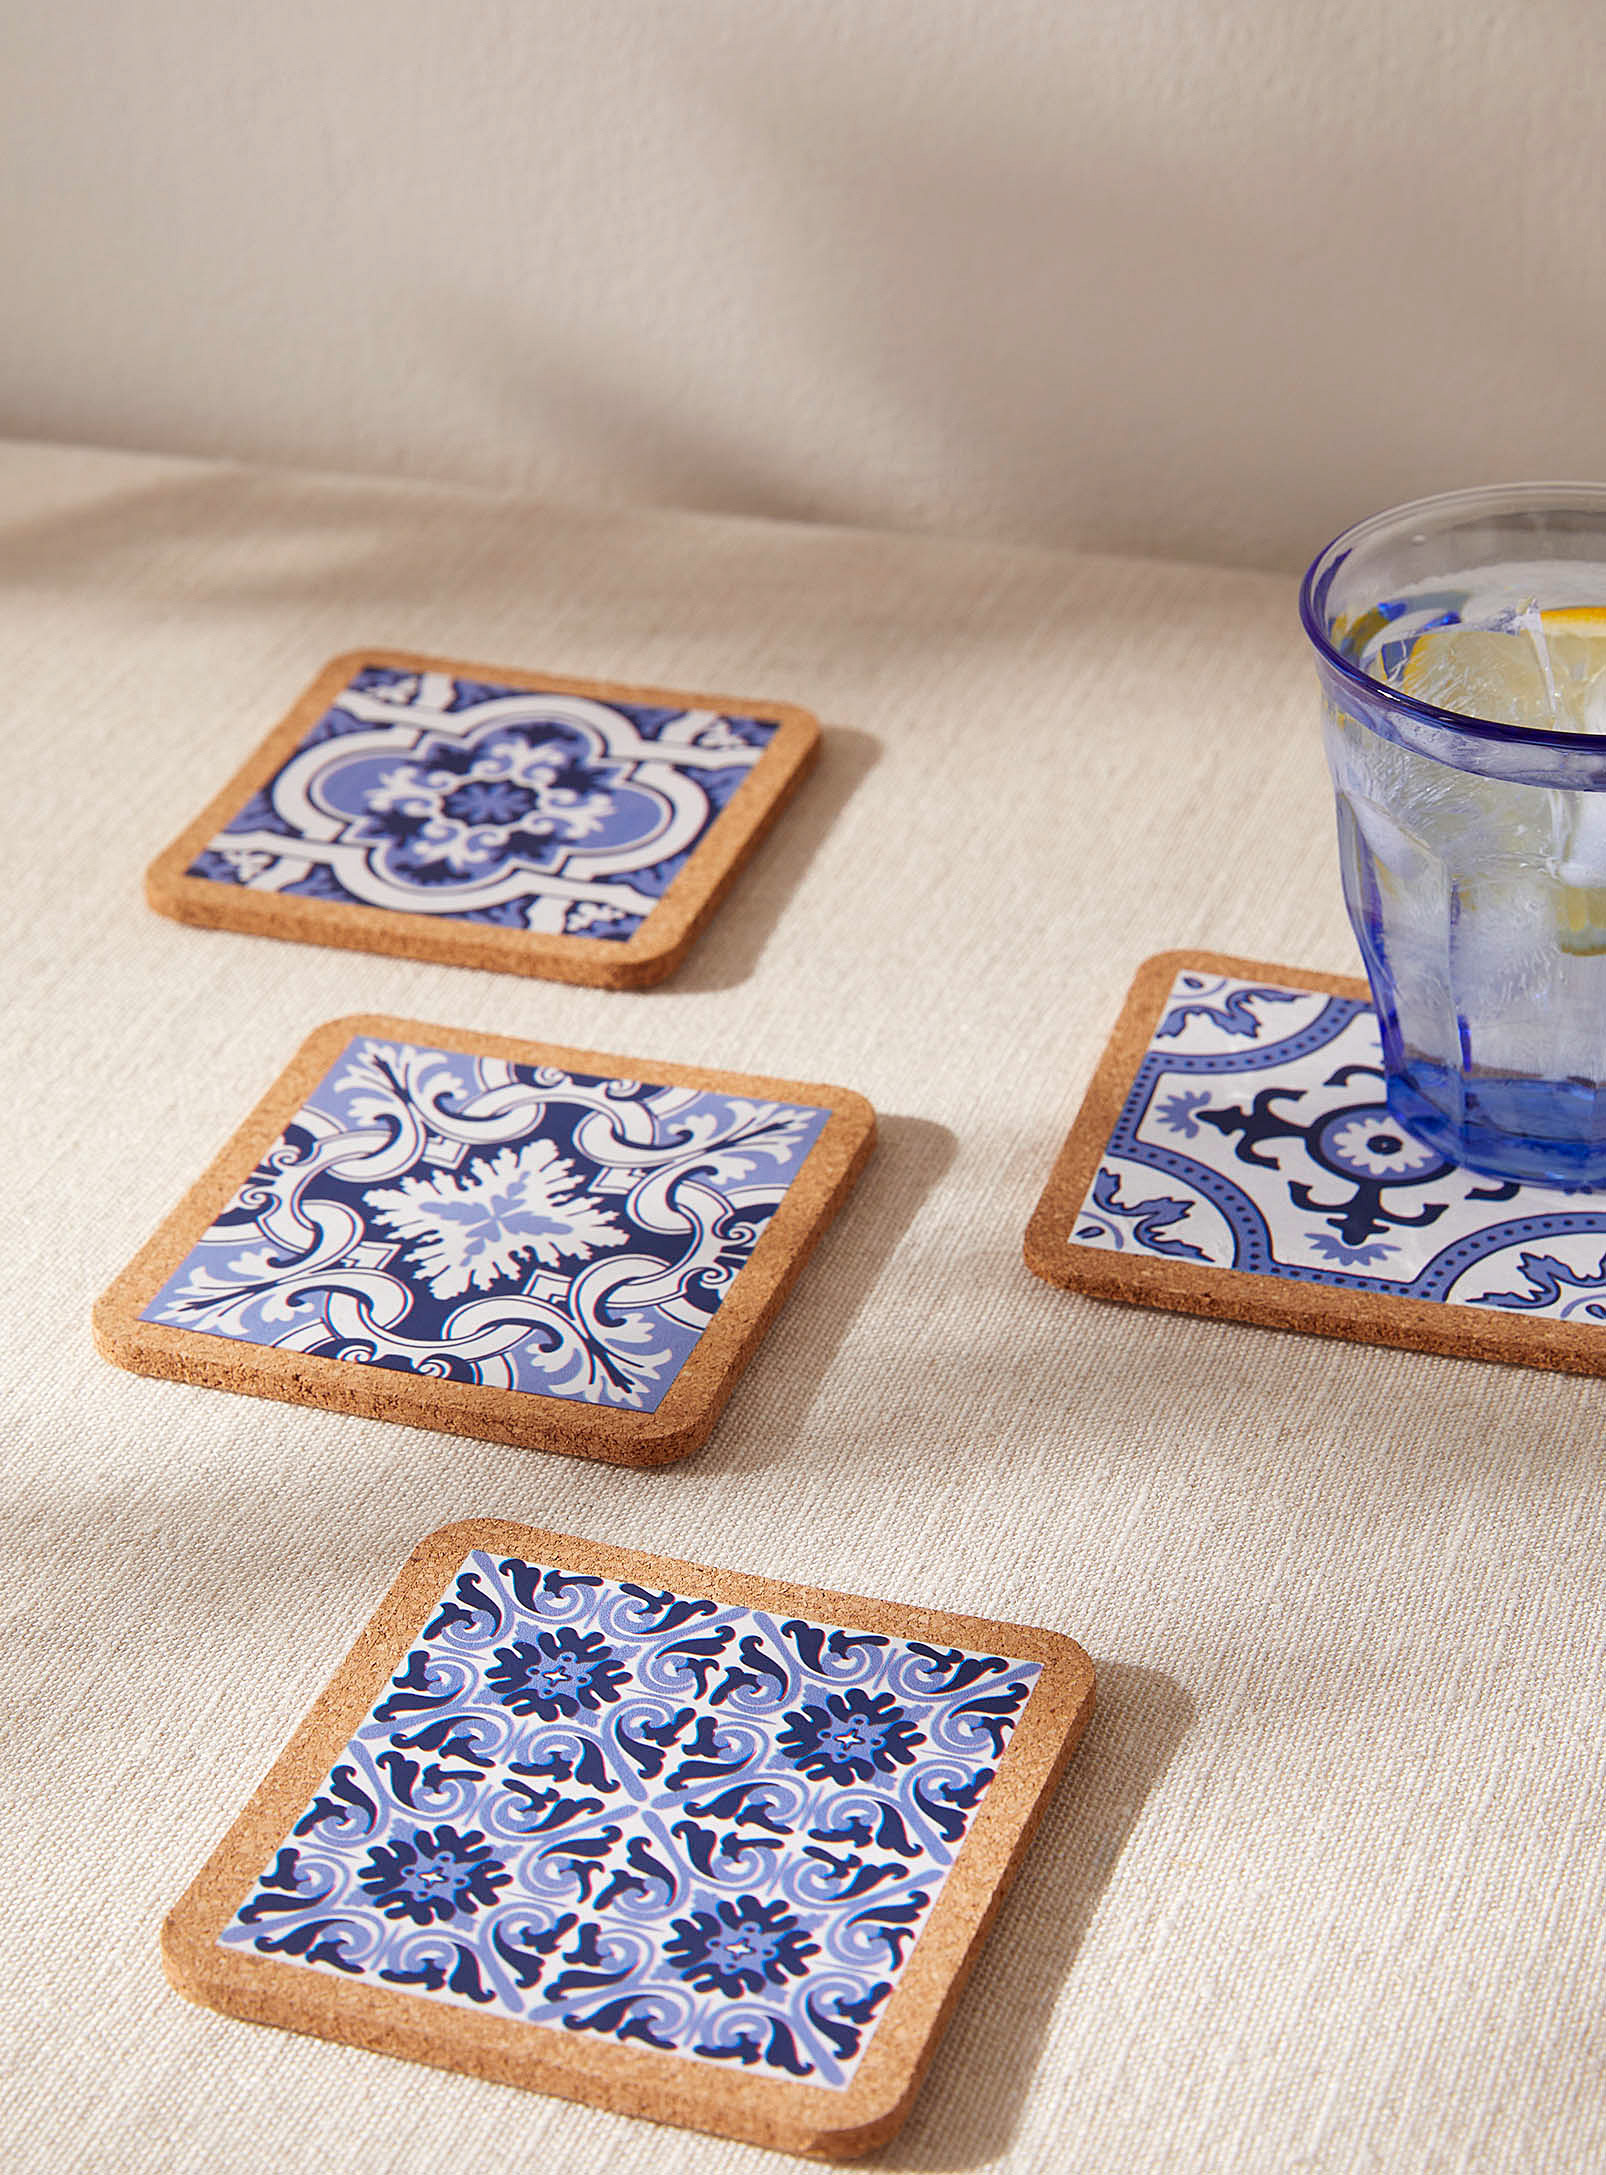 Simons Maison Portuguese Tiles Cork Coasters Set Of 4 In Patterned Brown